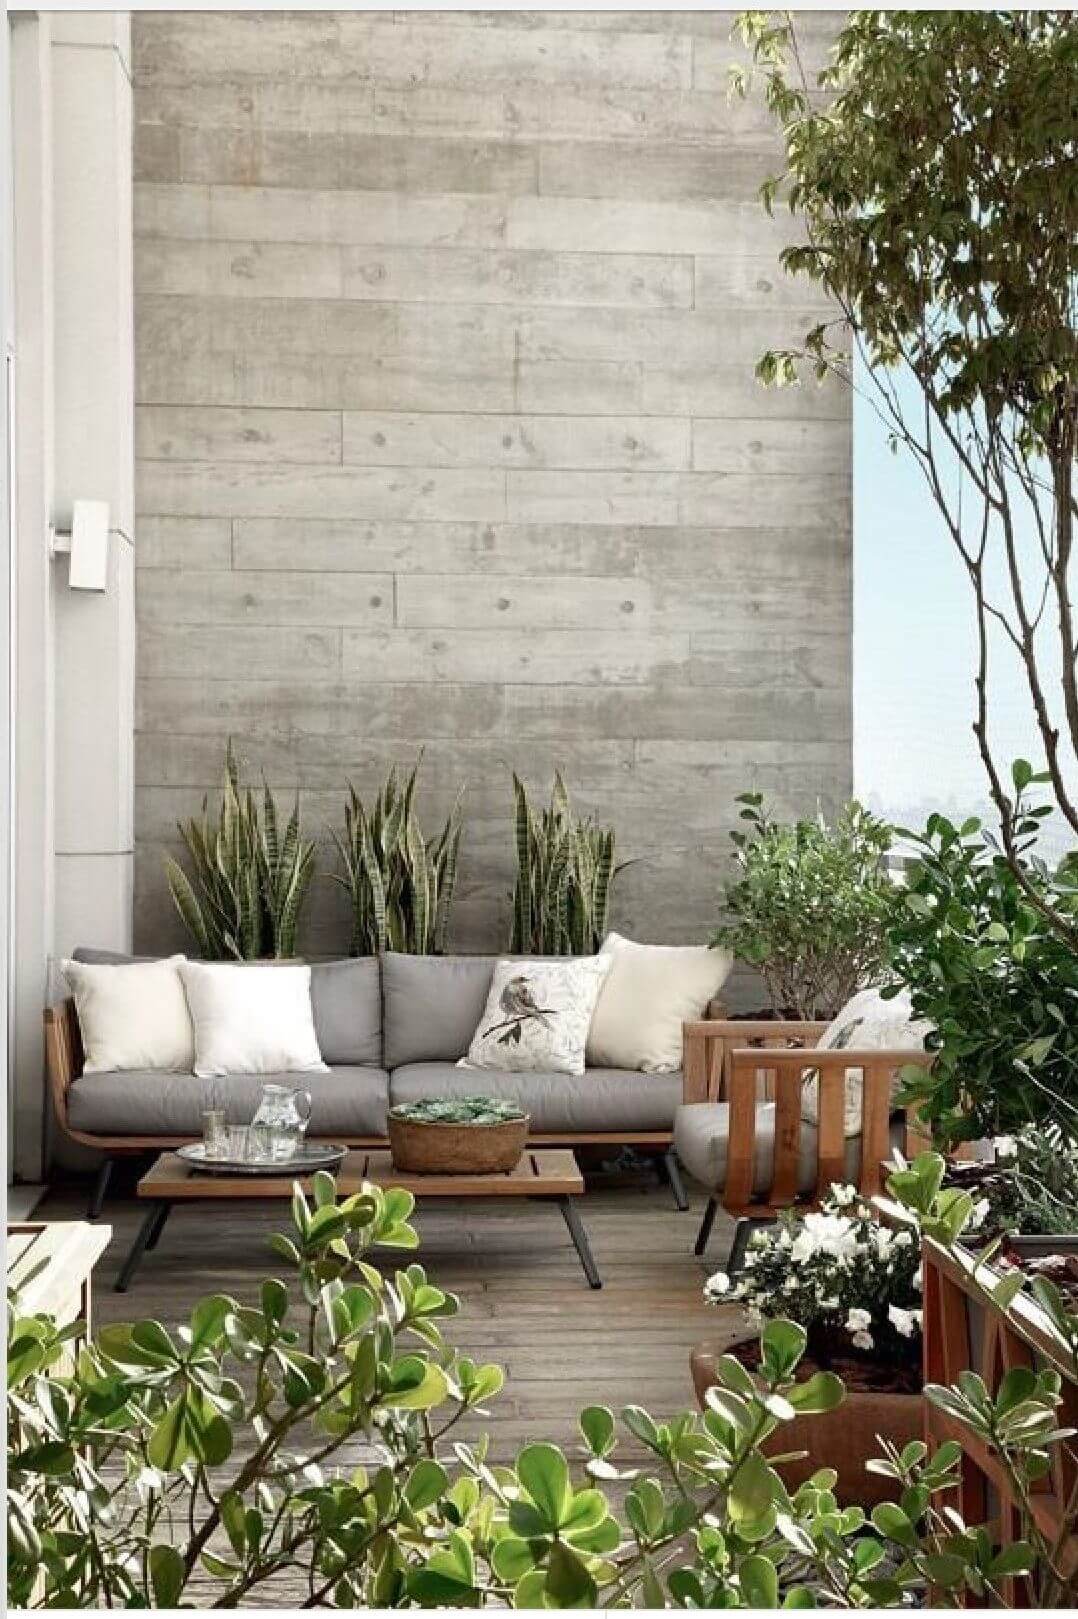 8- A concrete wall for a small, stylish terrace